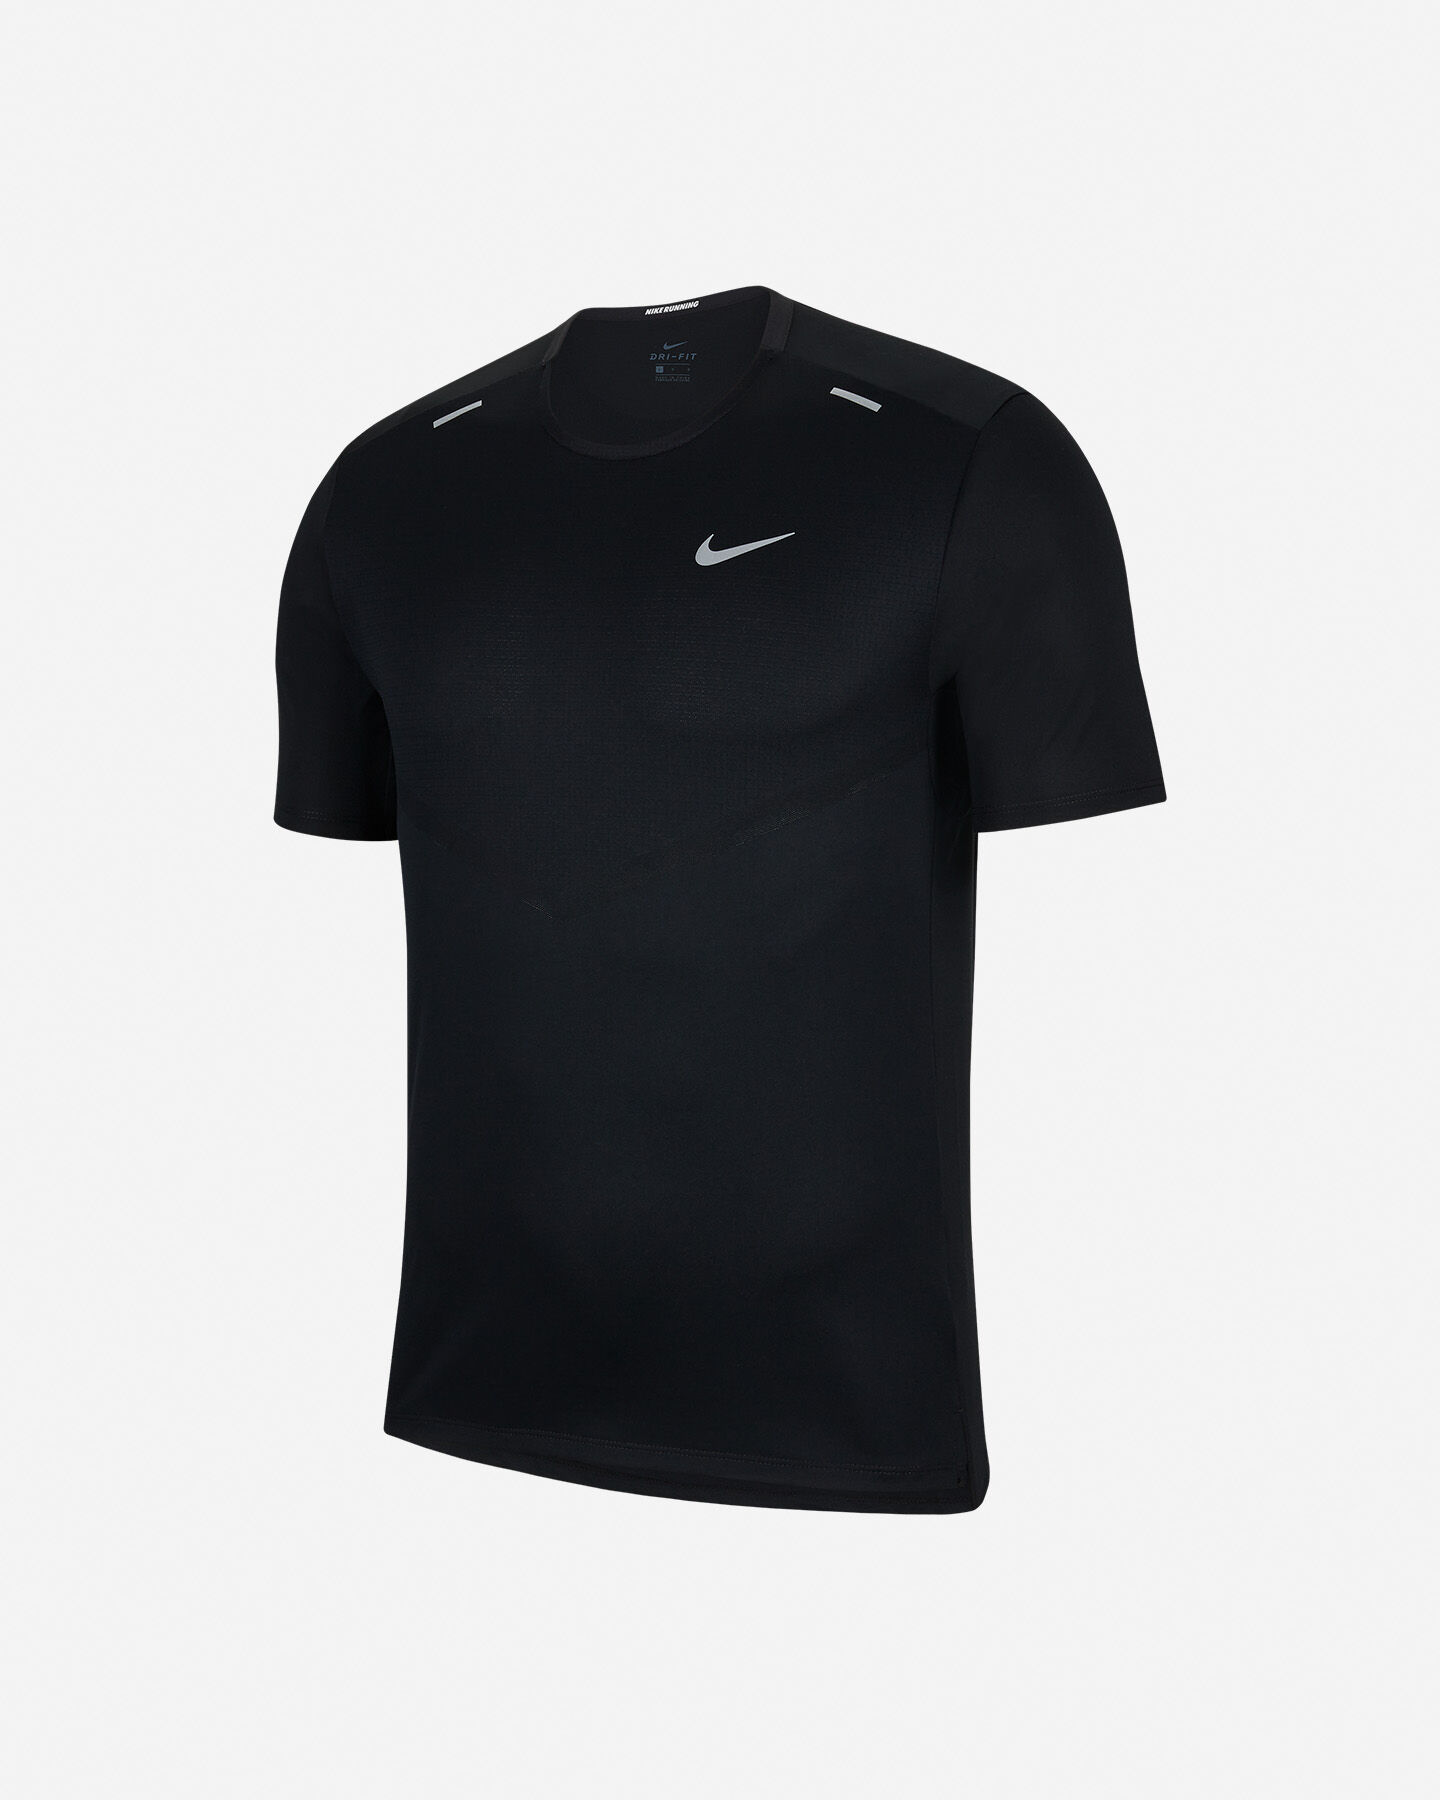  T-Shirt running NIKE RISE 365 M S5299231|013|S scatto 0